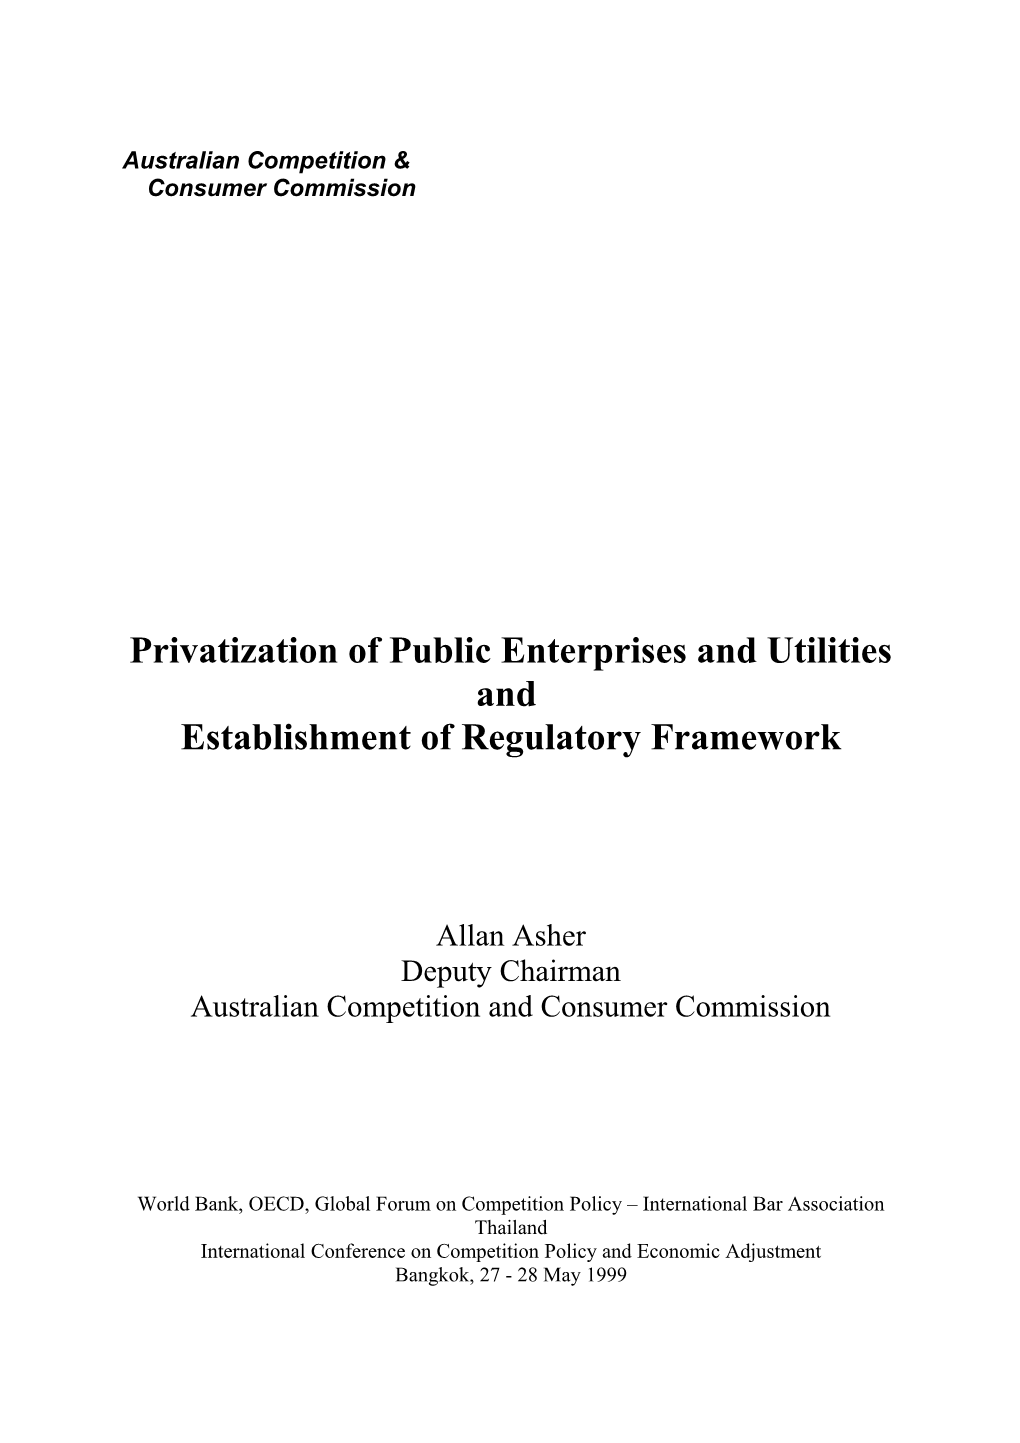 Privatization of Public Enterprises and Utilities And